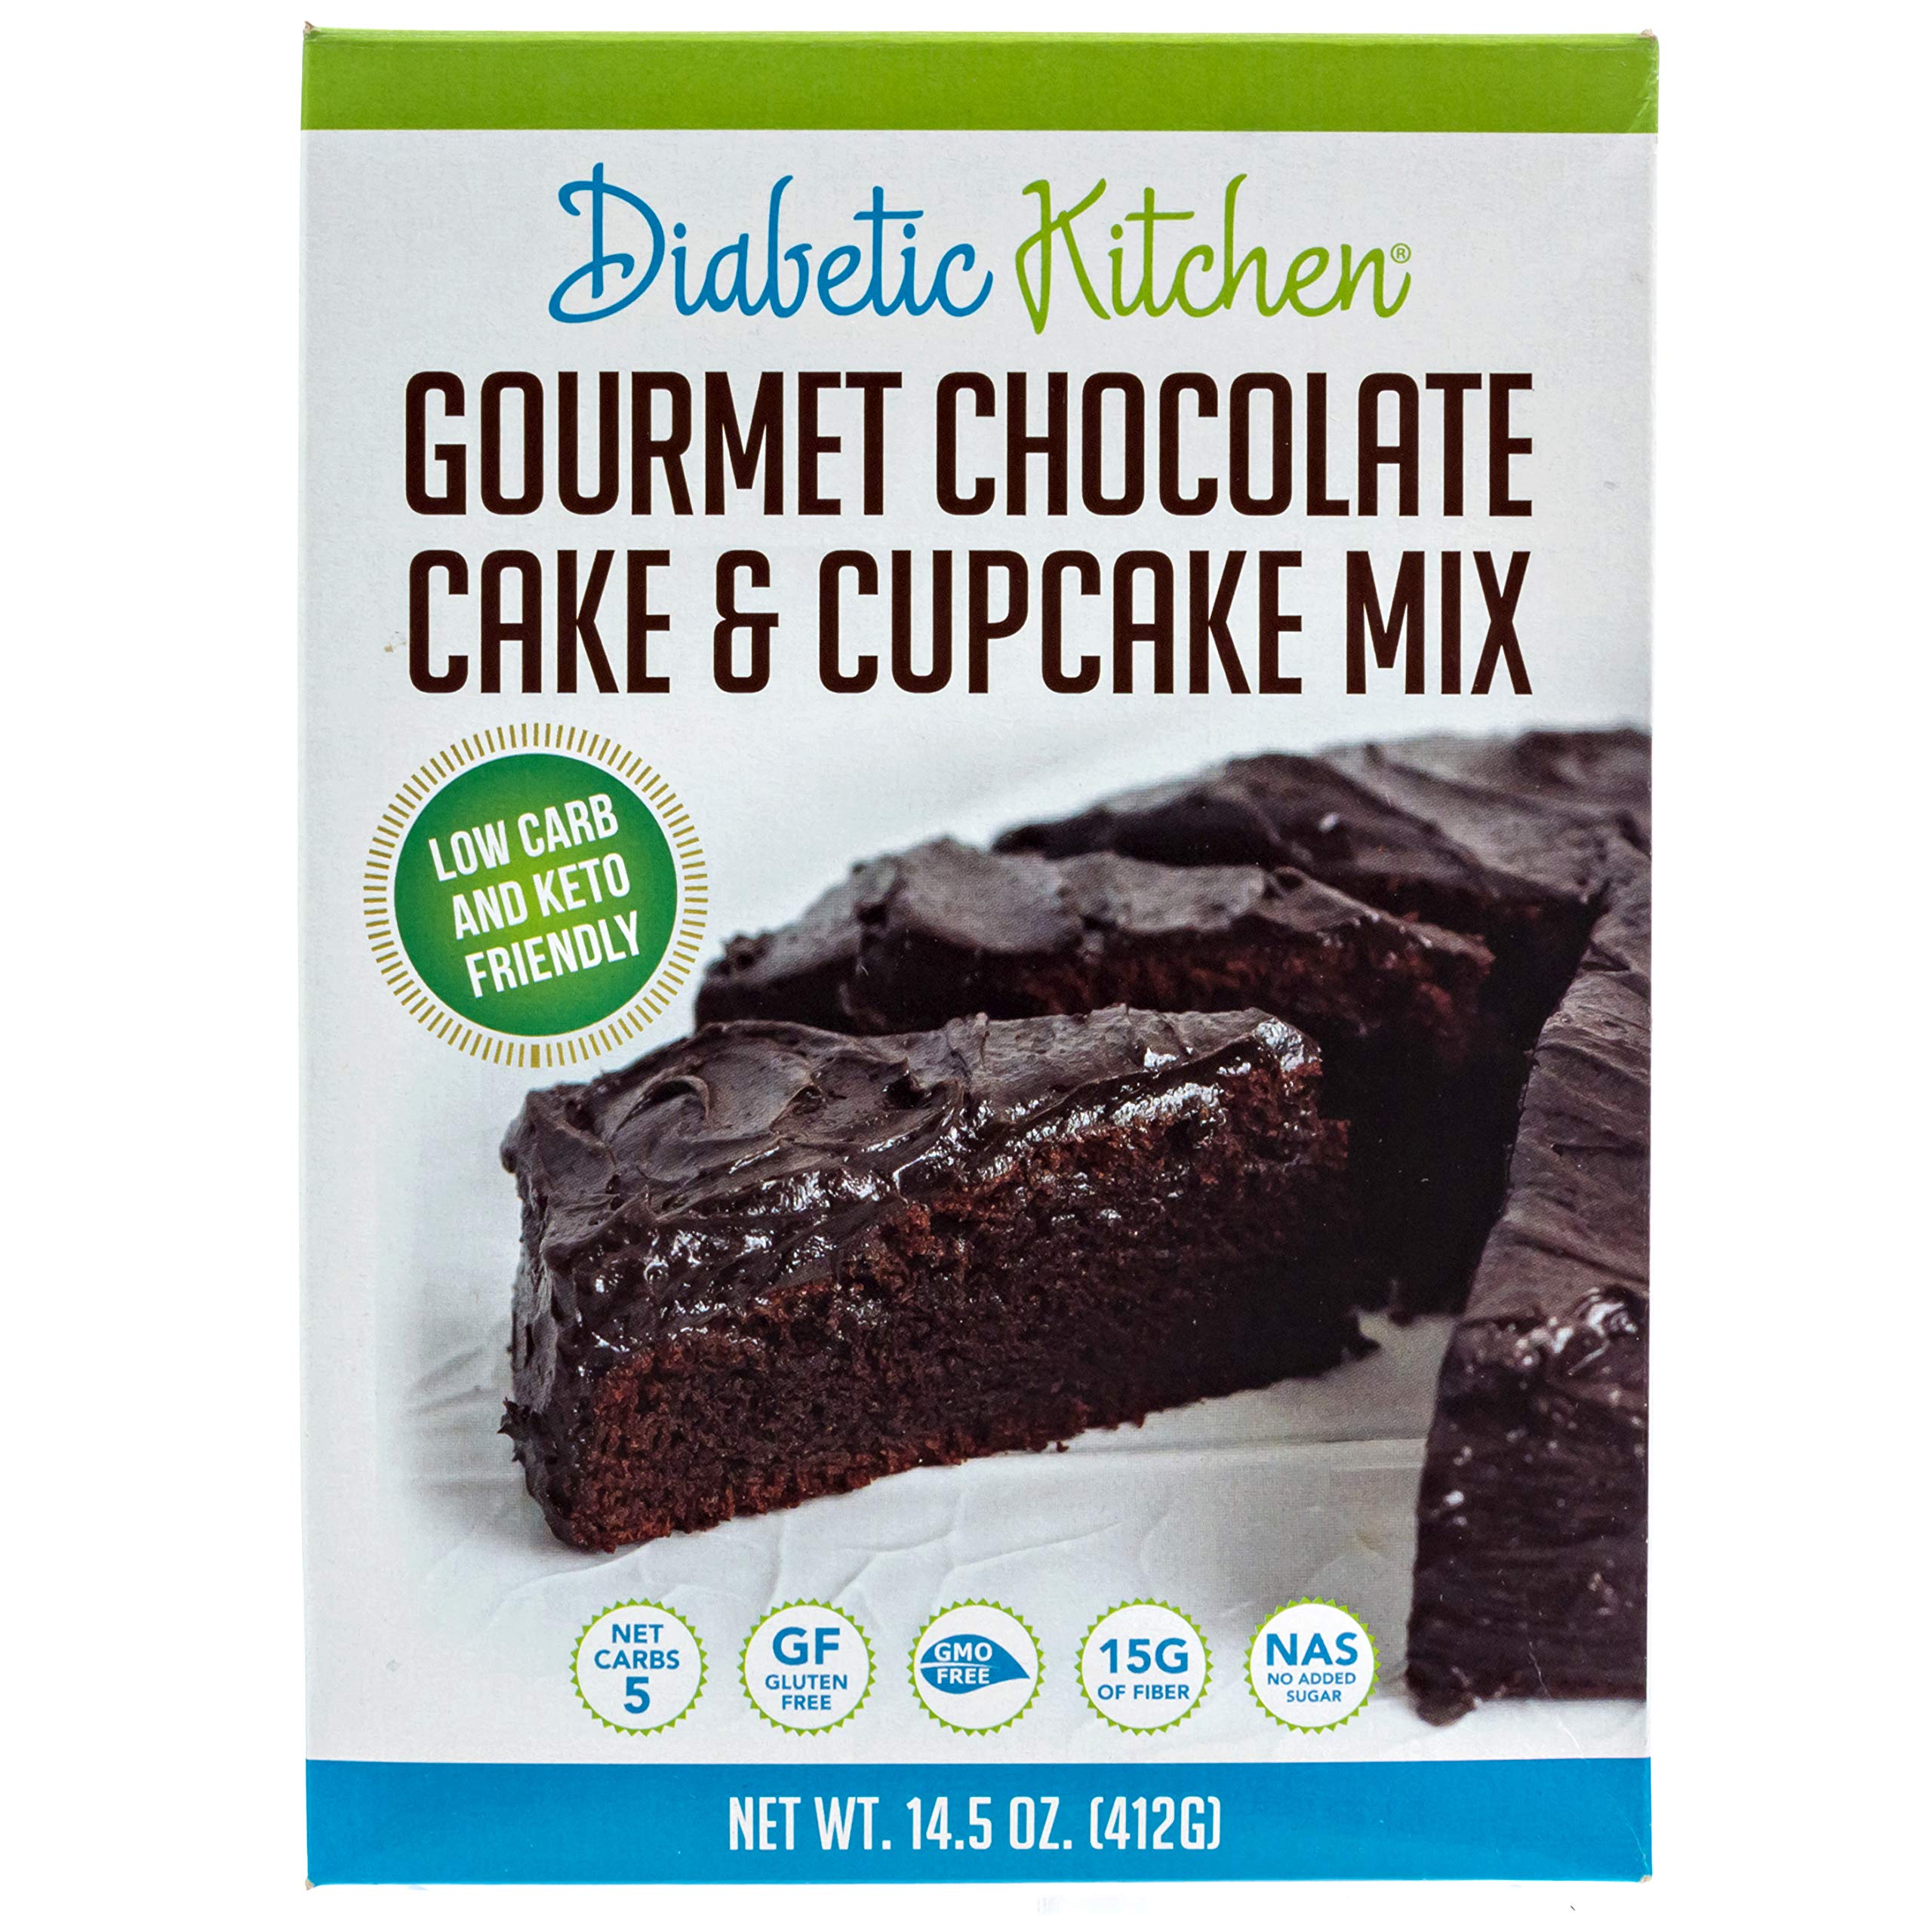 Book Cover Diabetic Kitchen Keto Chocolate Cake Mix - Keto Friendly Low Carb Cupcakes - No Sugar Added, Gluten-Free, 15g of Fiber, Non-GMO, No Artificial Sweeteners or Sugar Alcohols